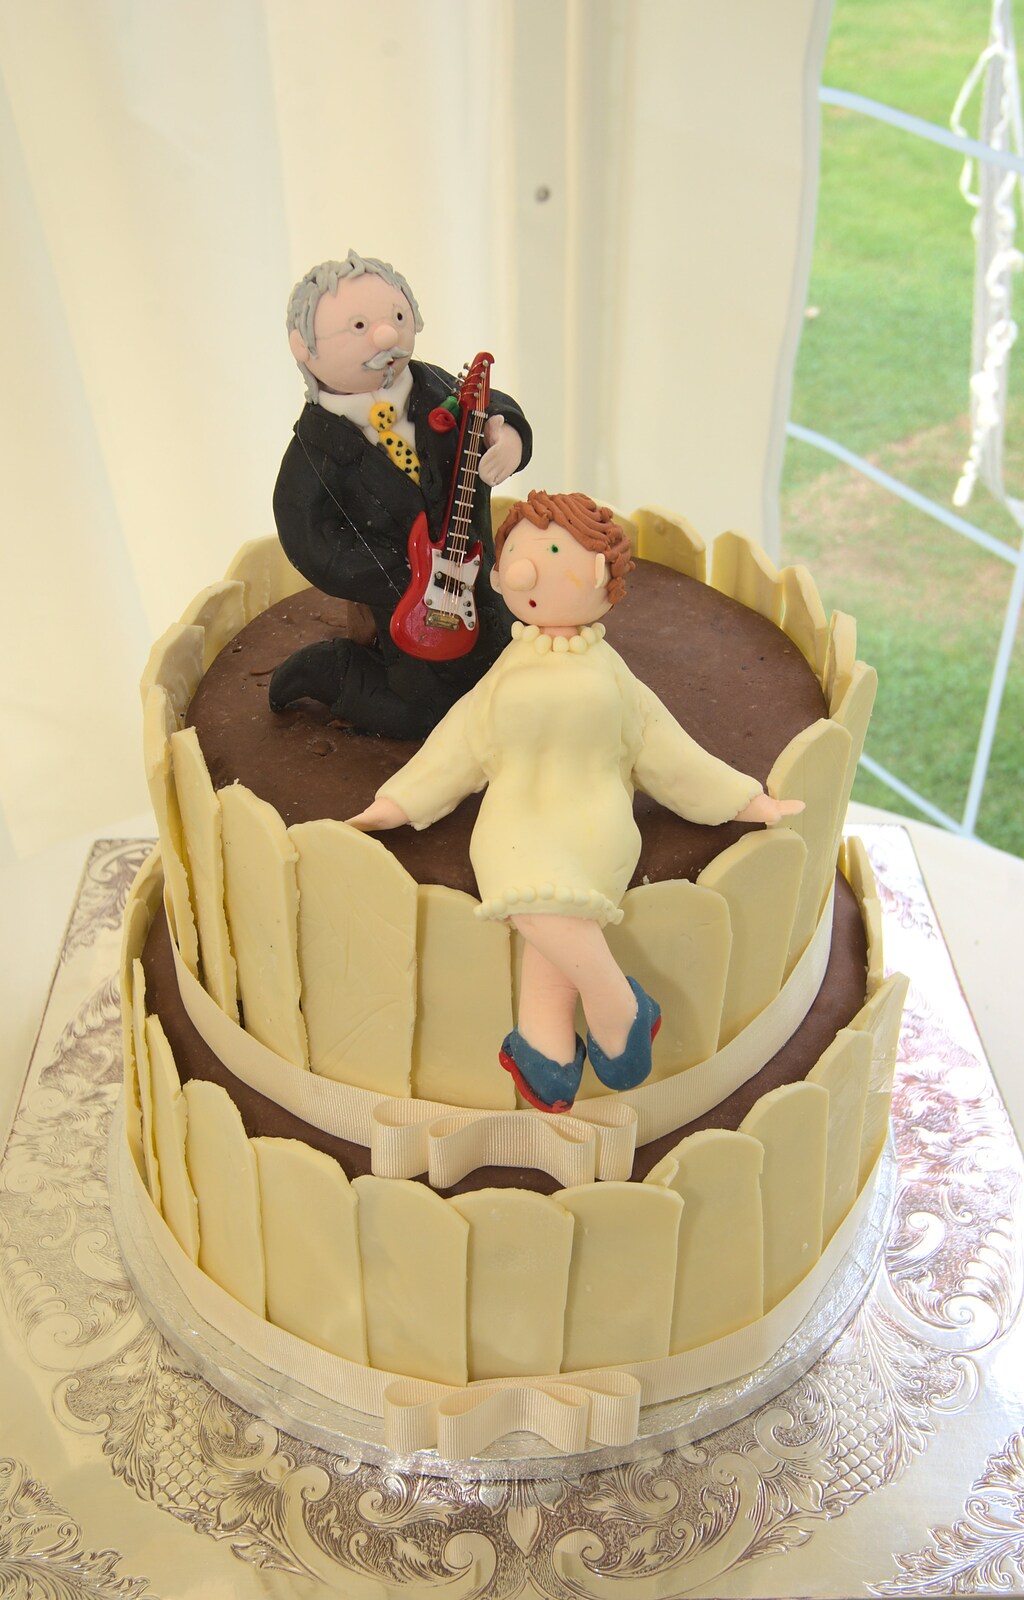 The cake from Rob and Wilma's Wedding, Thornham and Thrandeston, Suffolk - 6th August 2011